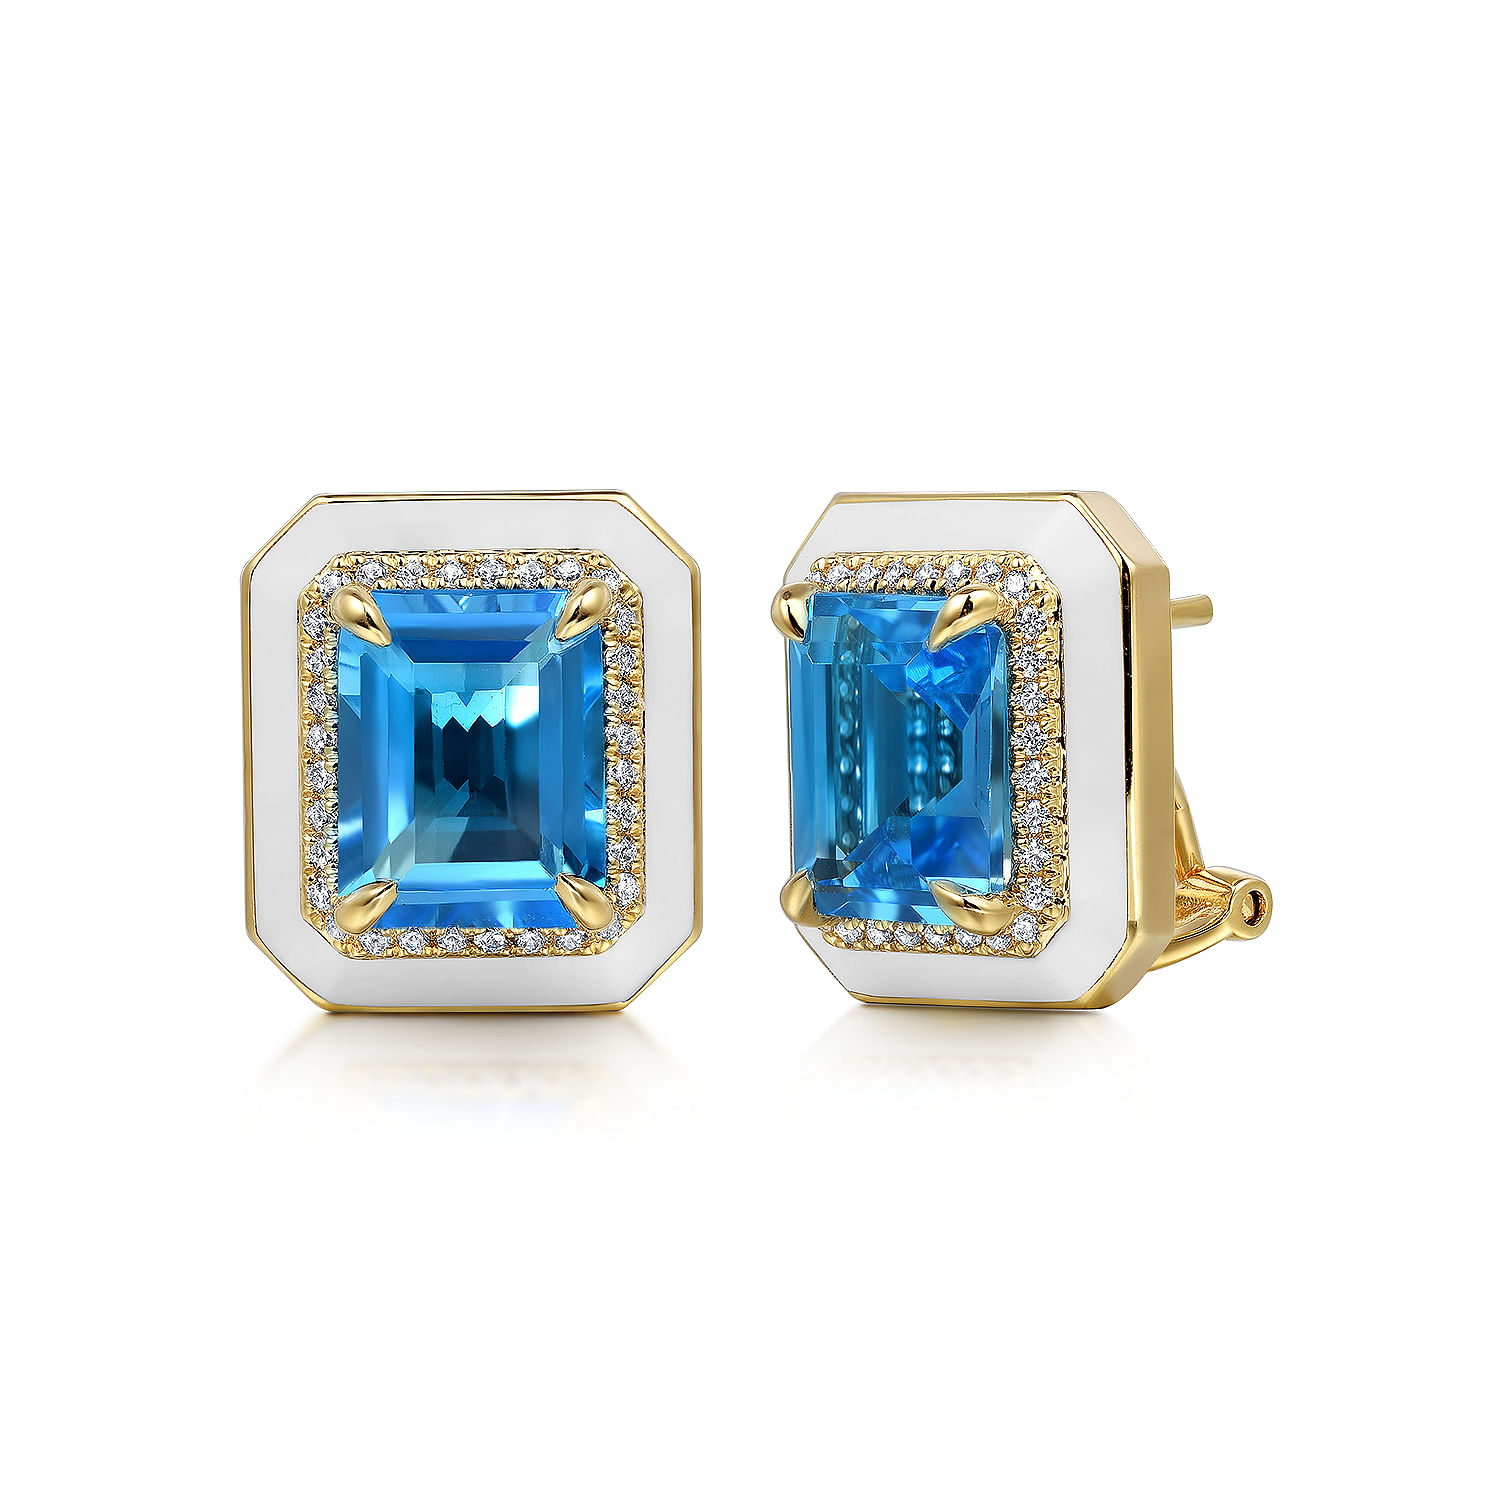 14K Yellow Gold Diamond and Blue Topaz Emerald Cut Earrings With Flower Pattern J-Back and White Enamel